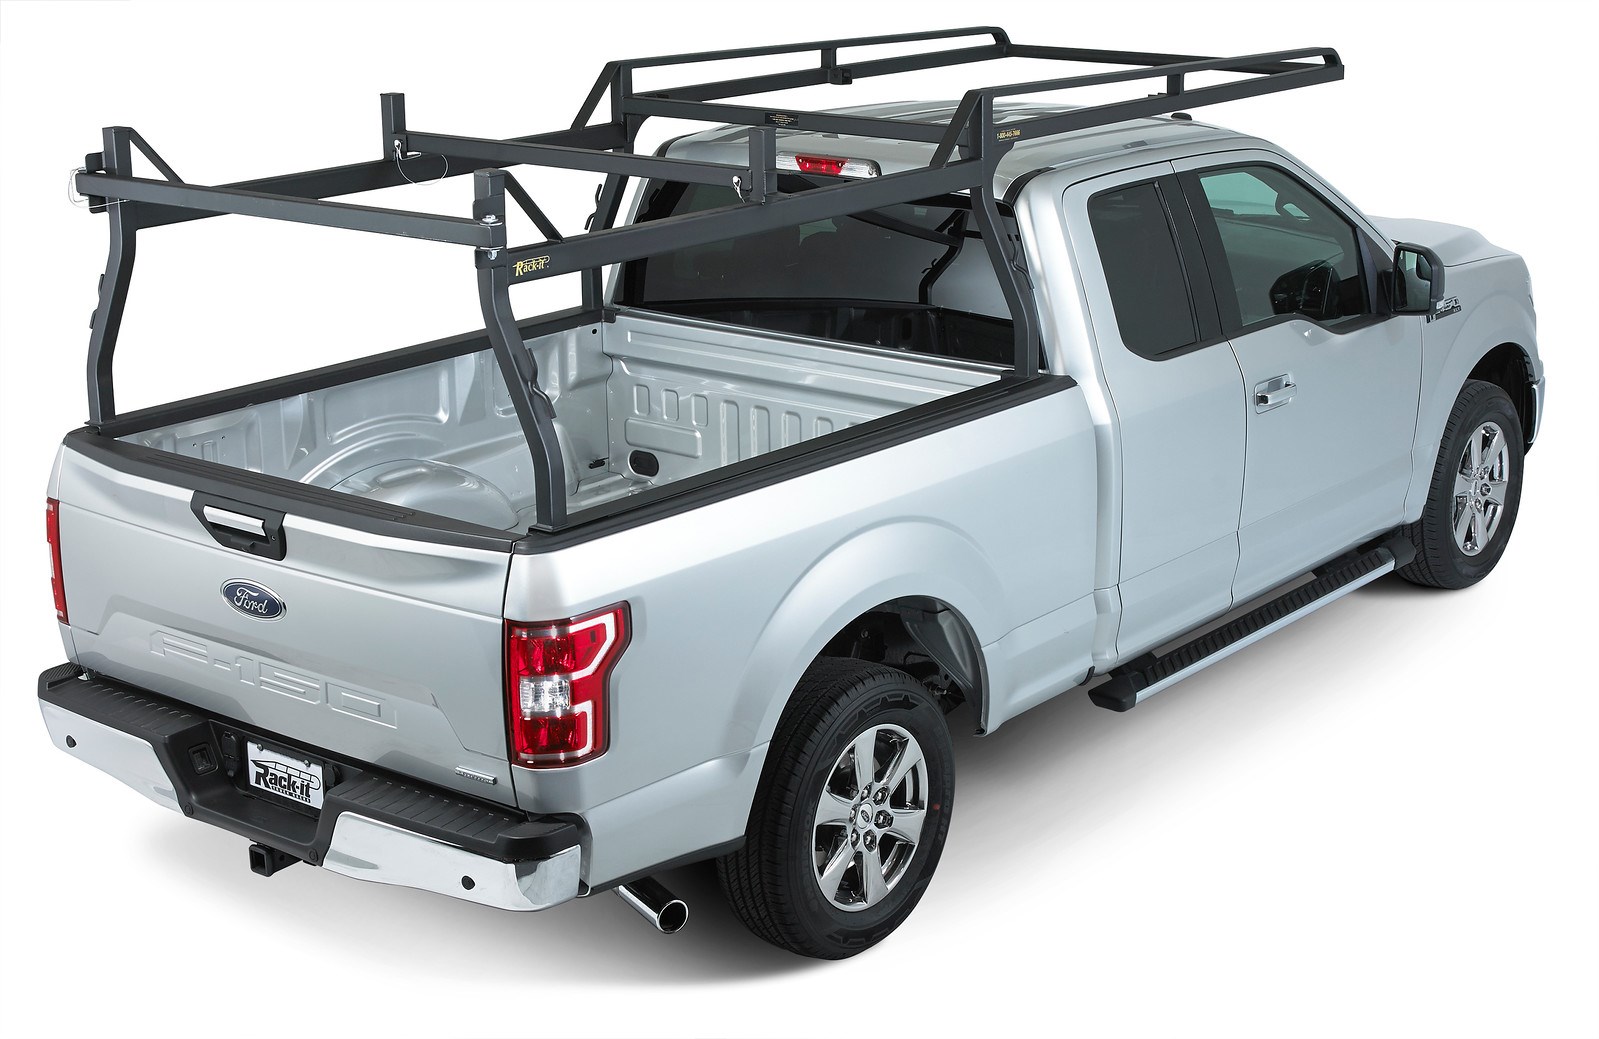 rack-it 2000 series square truck rack on f150 side view